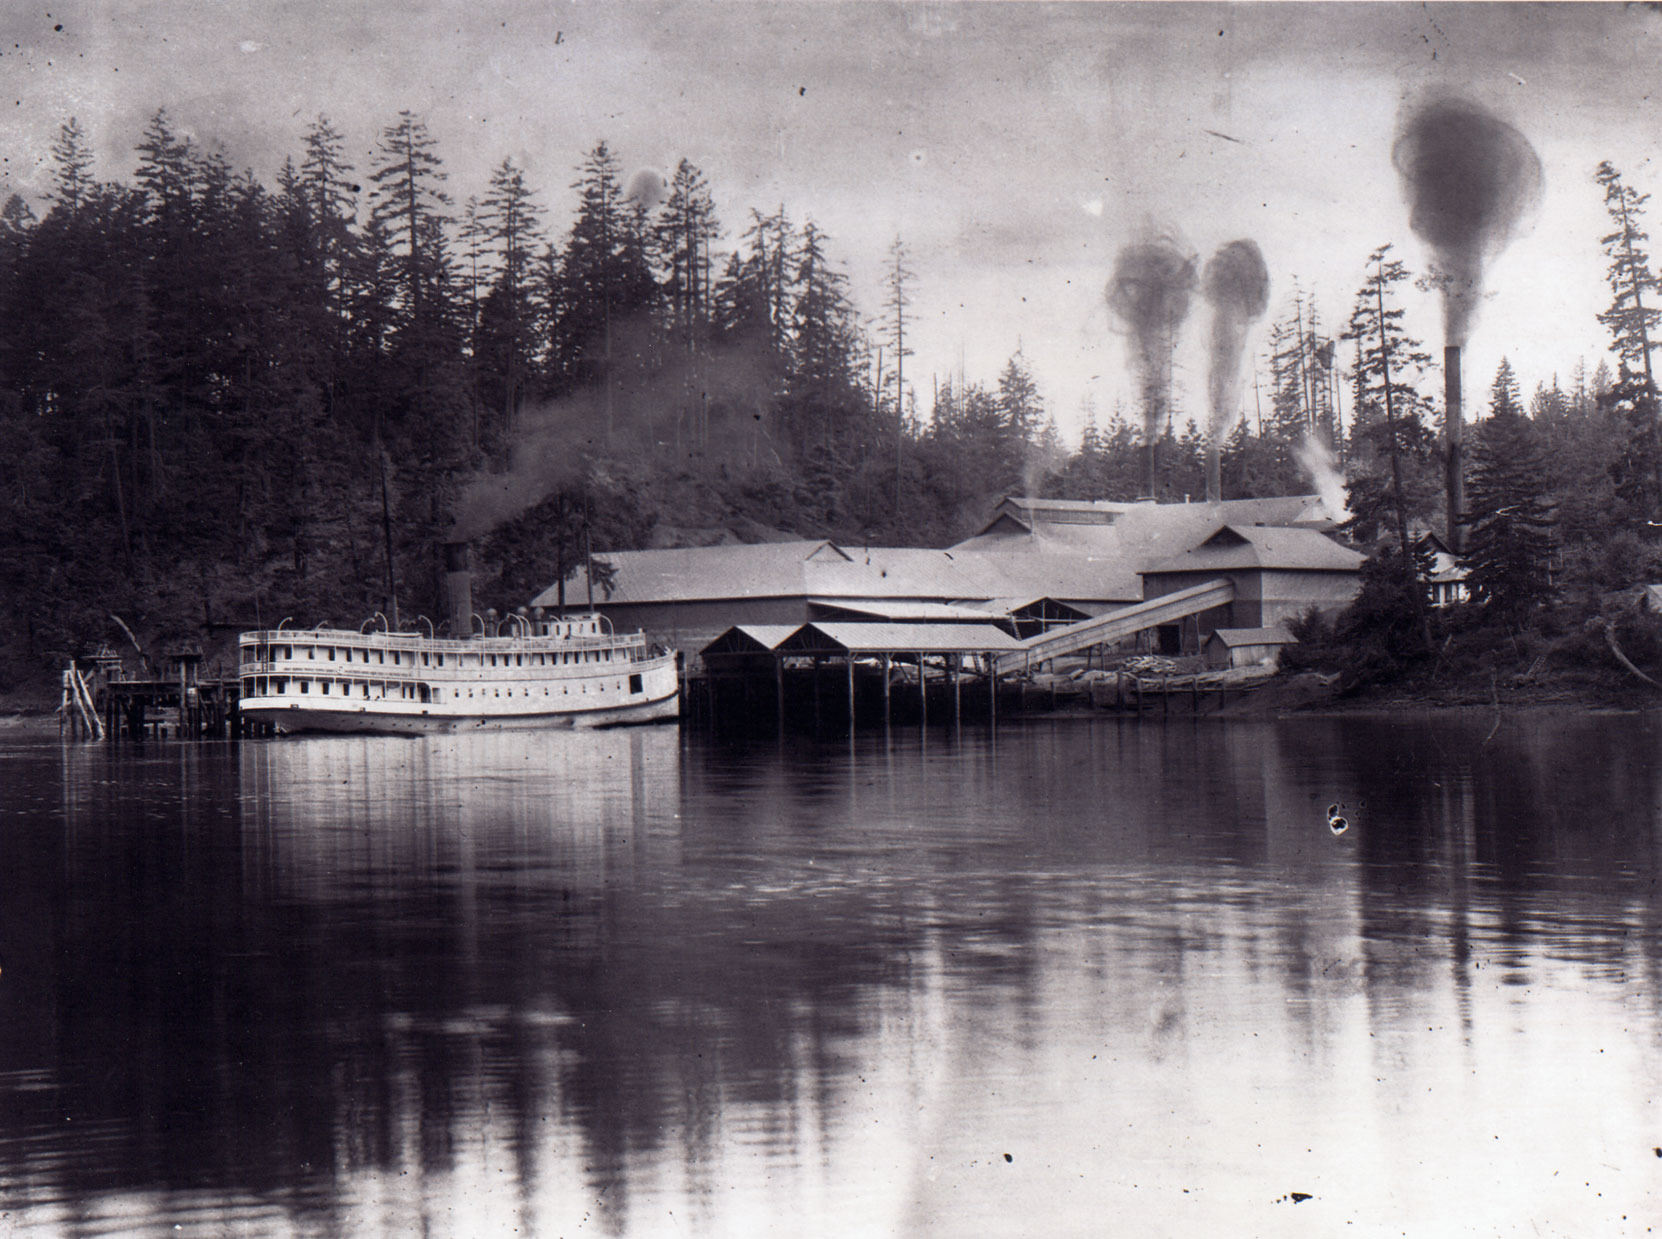 The CPR steamer Charmer at the Vancouver Portland Cement Company wharf, Tod Inlet, circa 1905 (BC Archives photo G-06188)